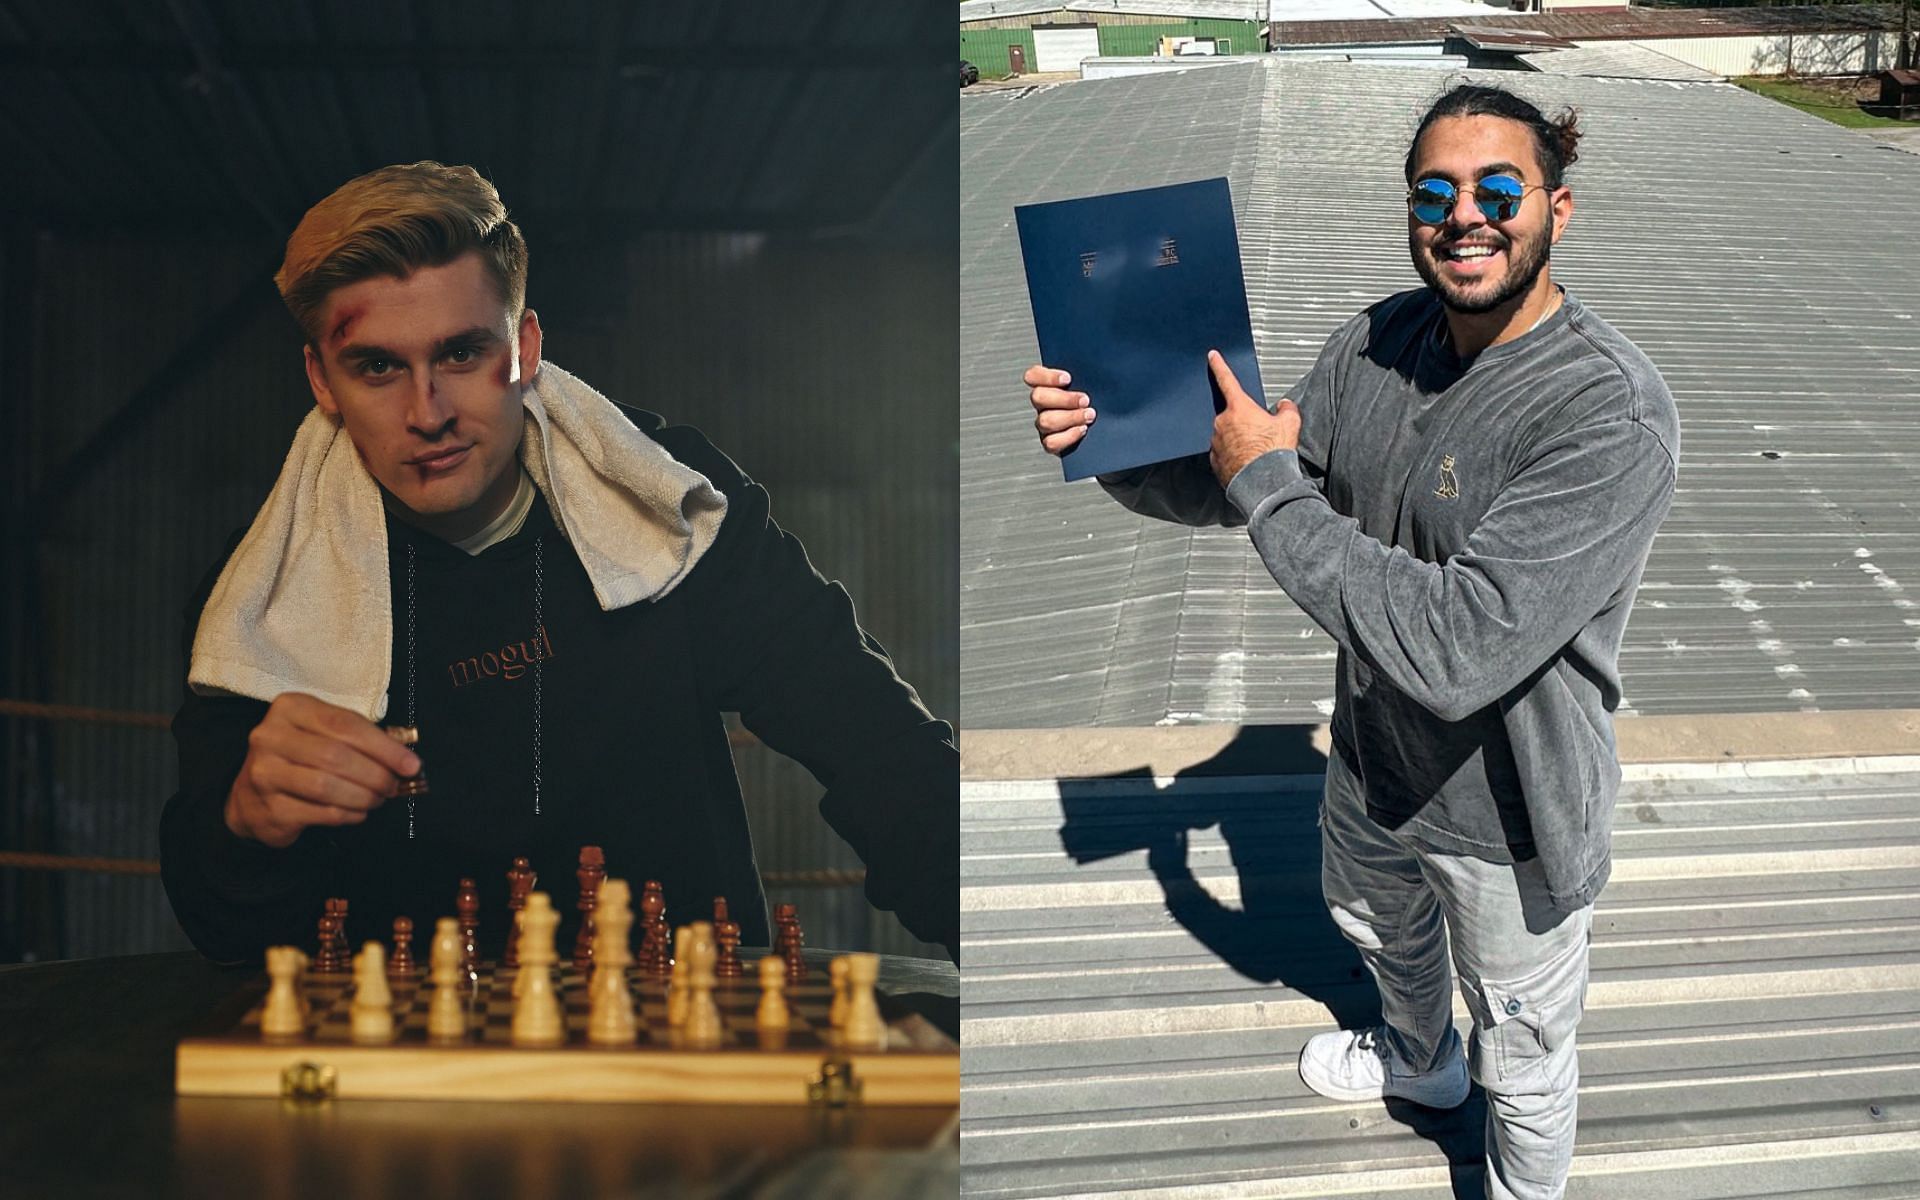 Ludwig and Arab had a confrontation on Twitter (Images via Ludwig and Arab/Twitter)